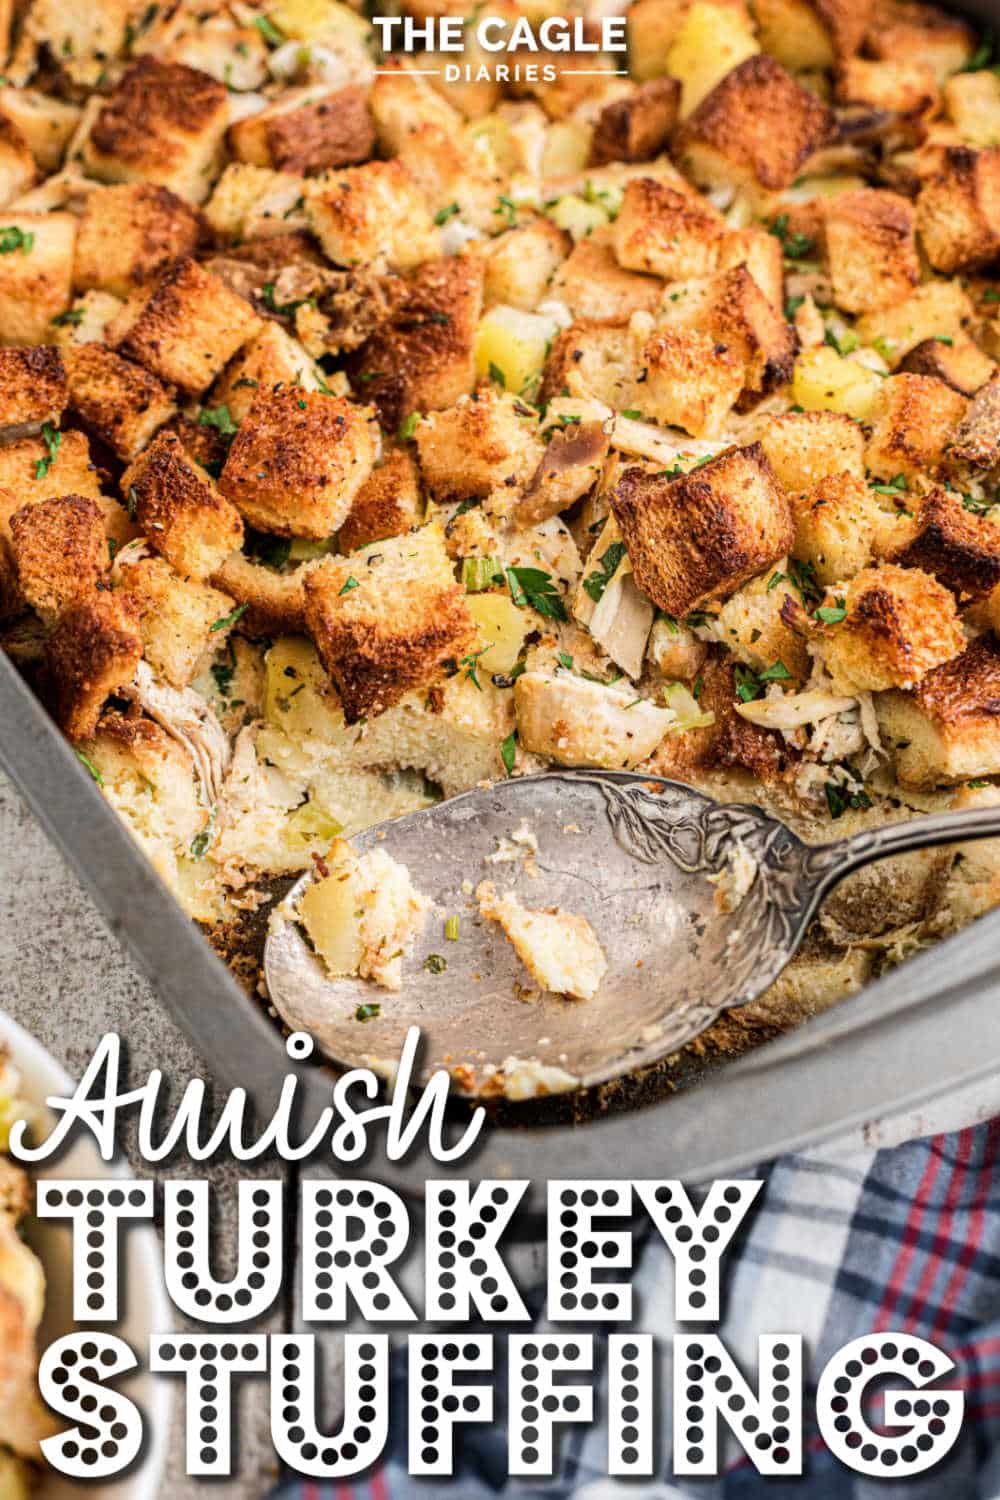 Amish Turkey Stuffing Recipe | The Cagle Diaries